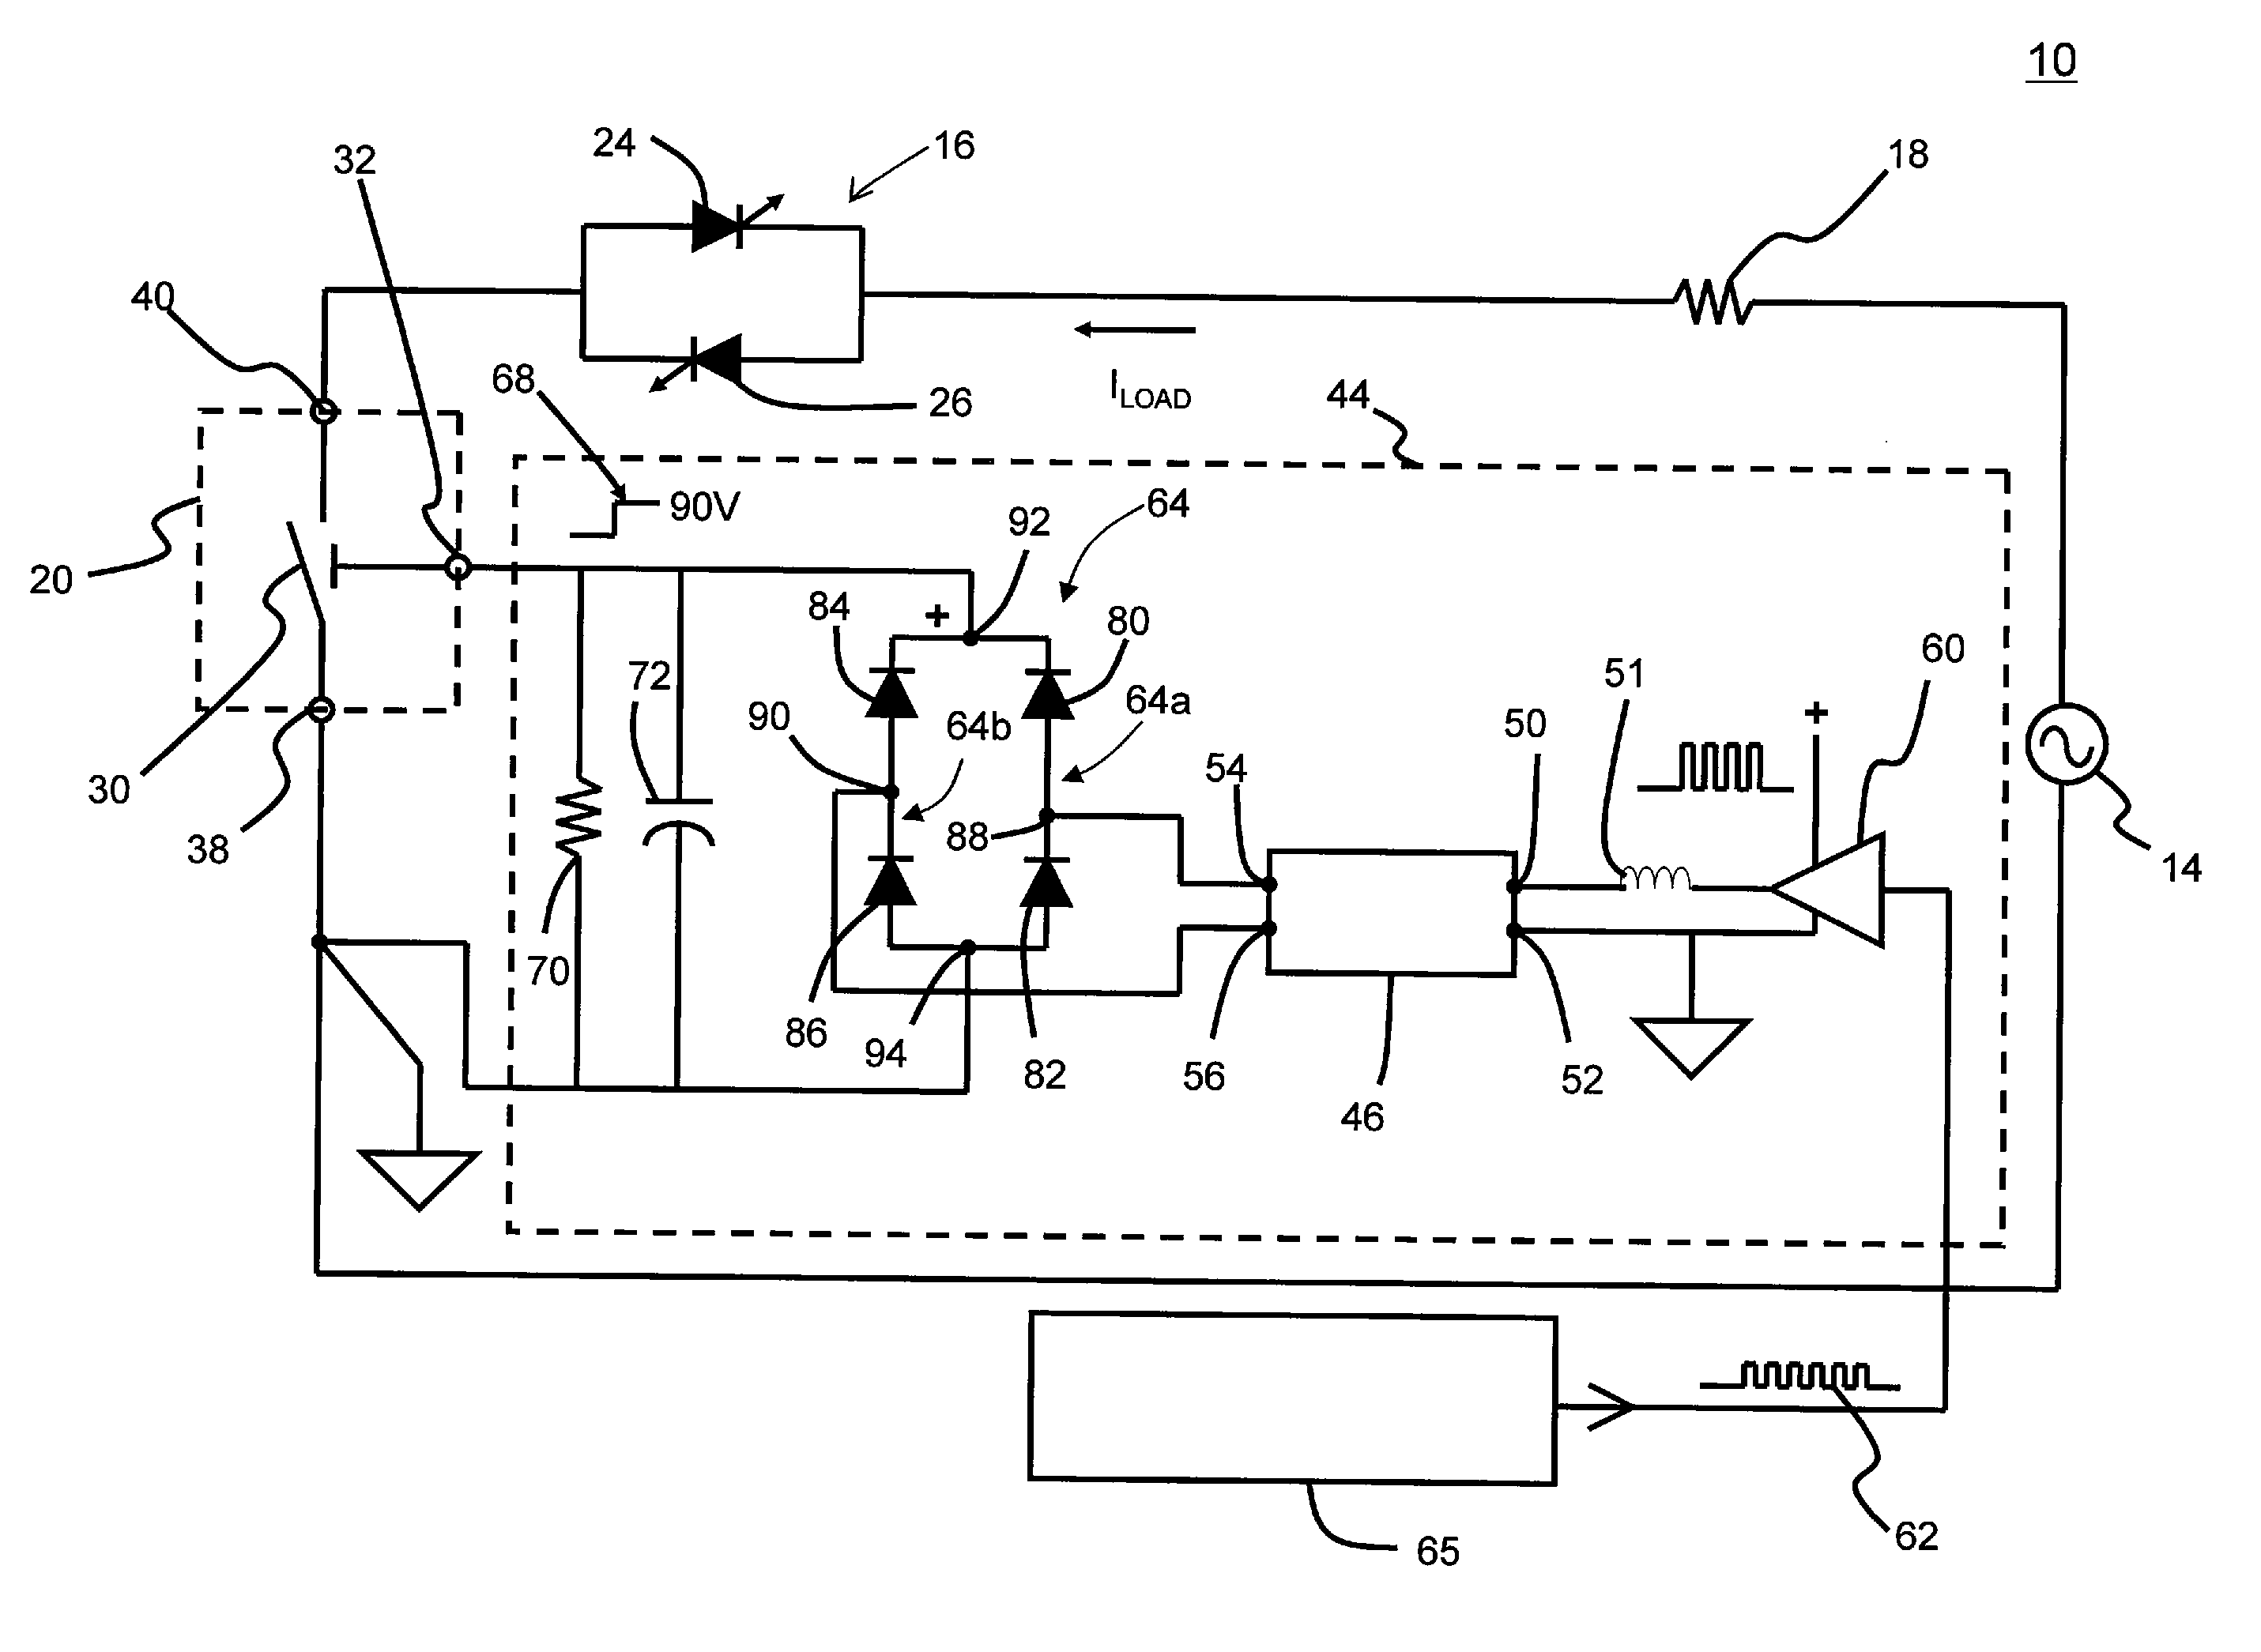 Circuit System With Supply Voltage For Driving An Electromechanical Switch